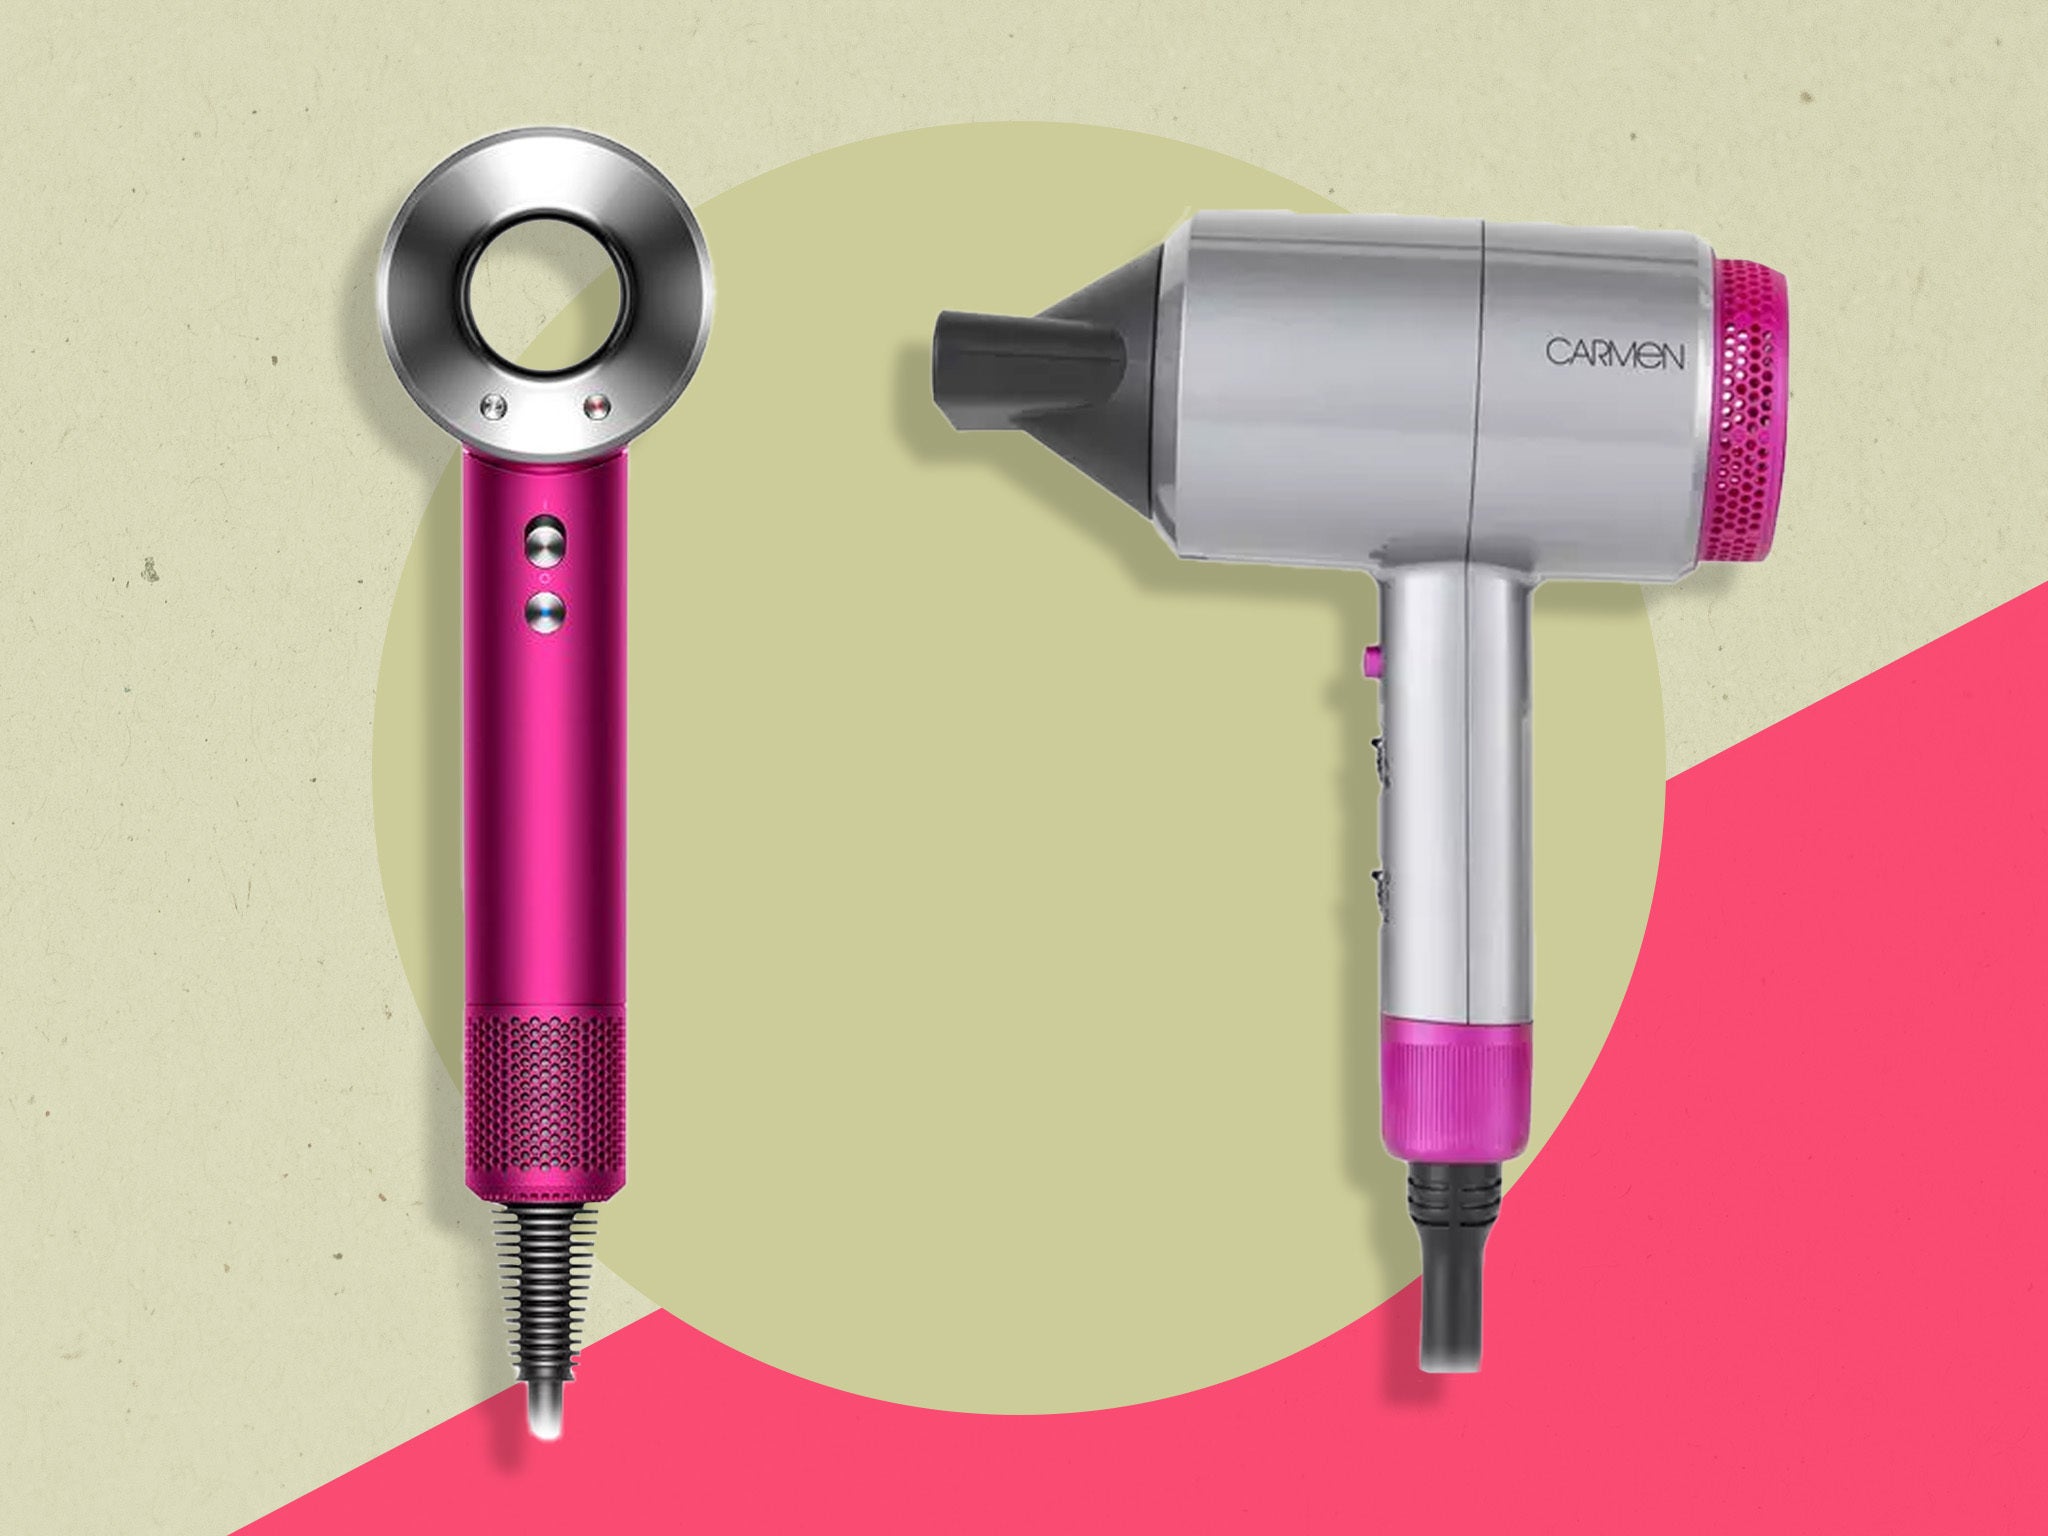 This Dyson hairdryer dupe costs just £20 | The Independent